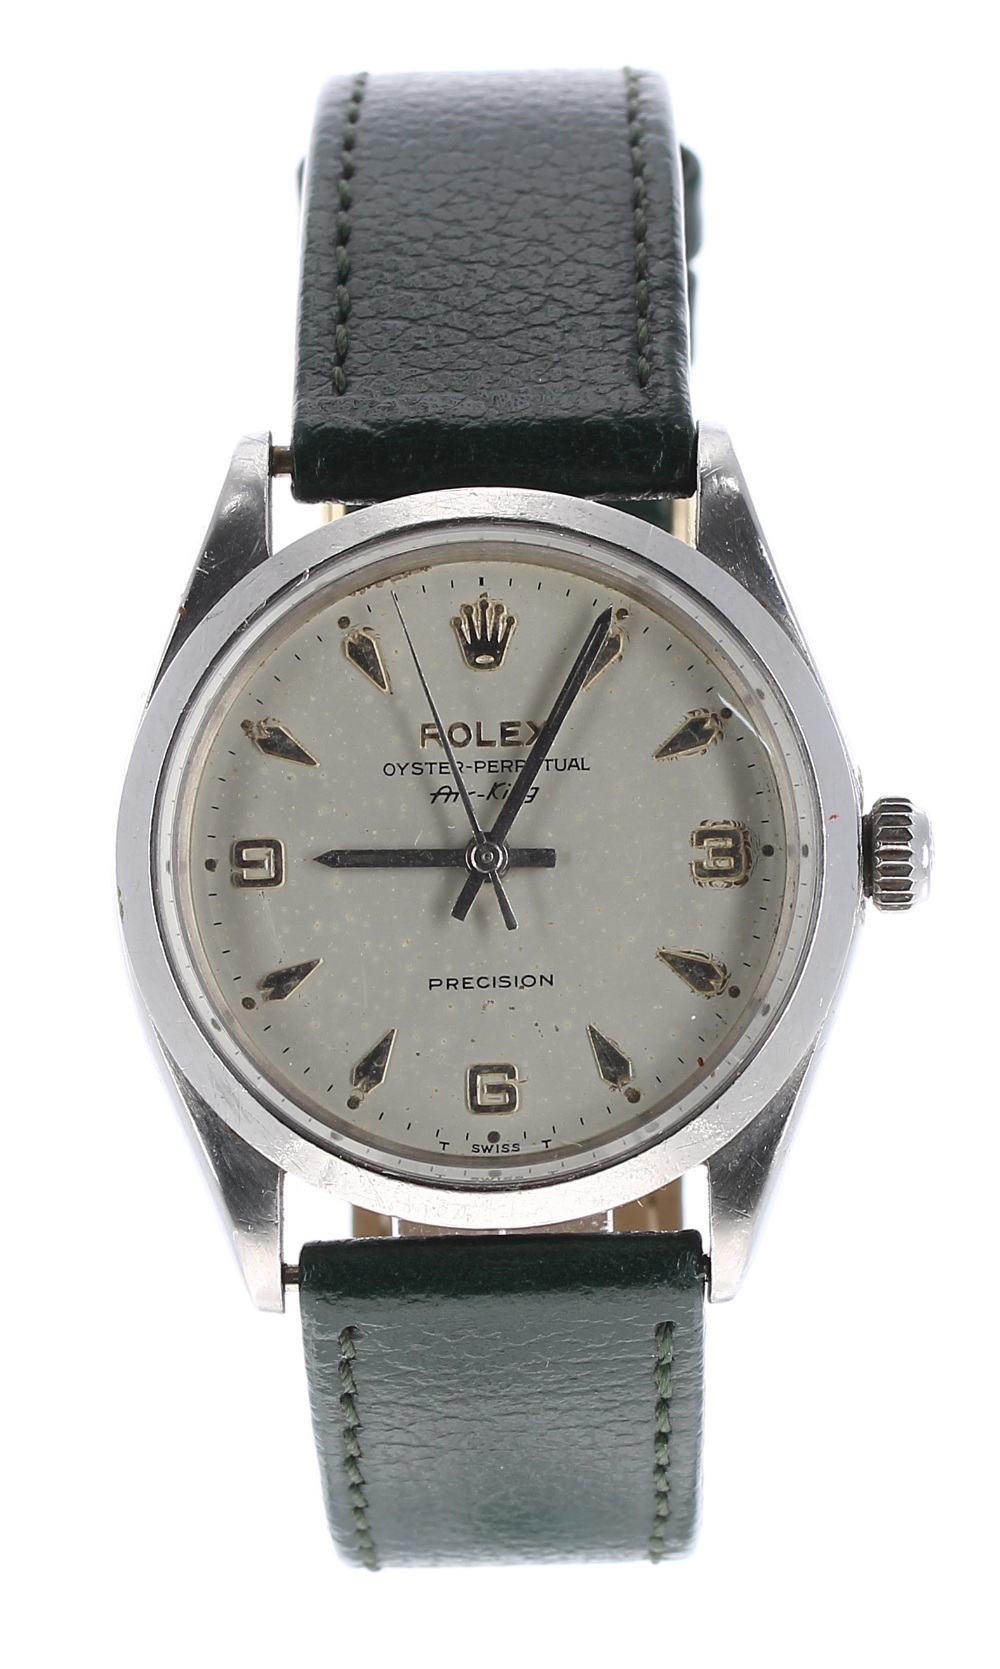 Rolex Oyster Perpetual Air-King Precision stainless steel gentleman's bracelet watch, ref. 5500,